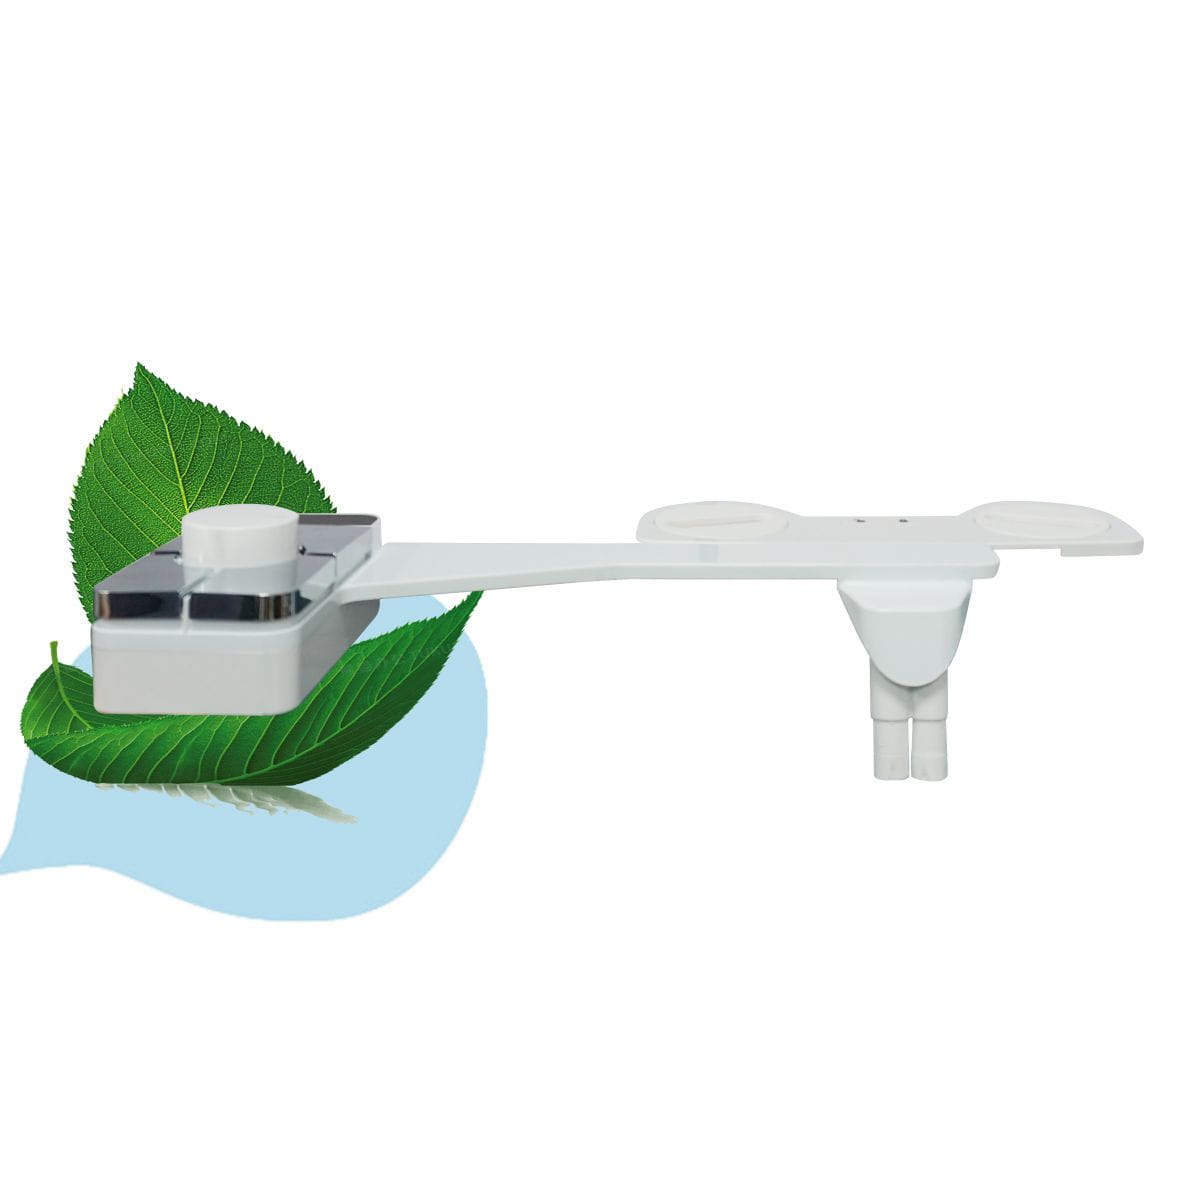 Ultra slim bidet attachment of one click disassembly